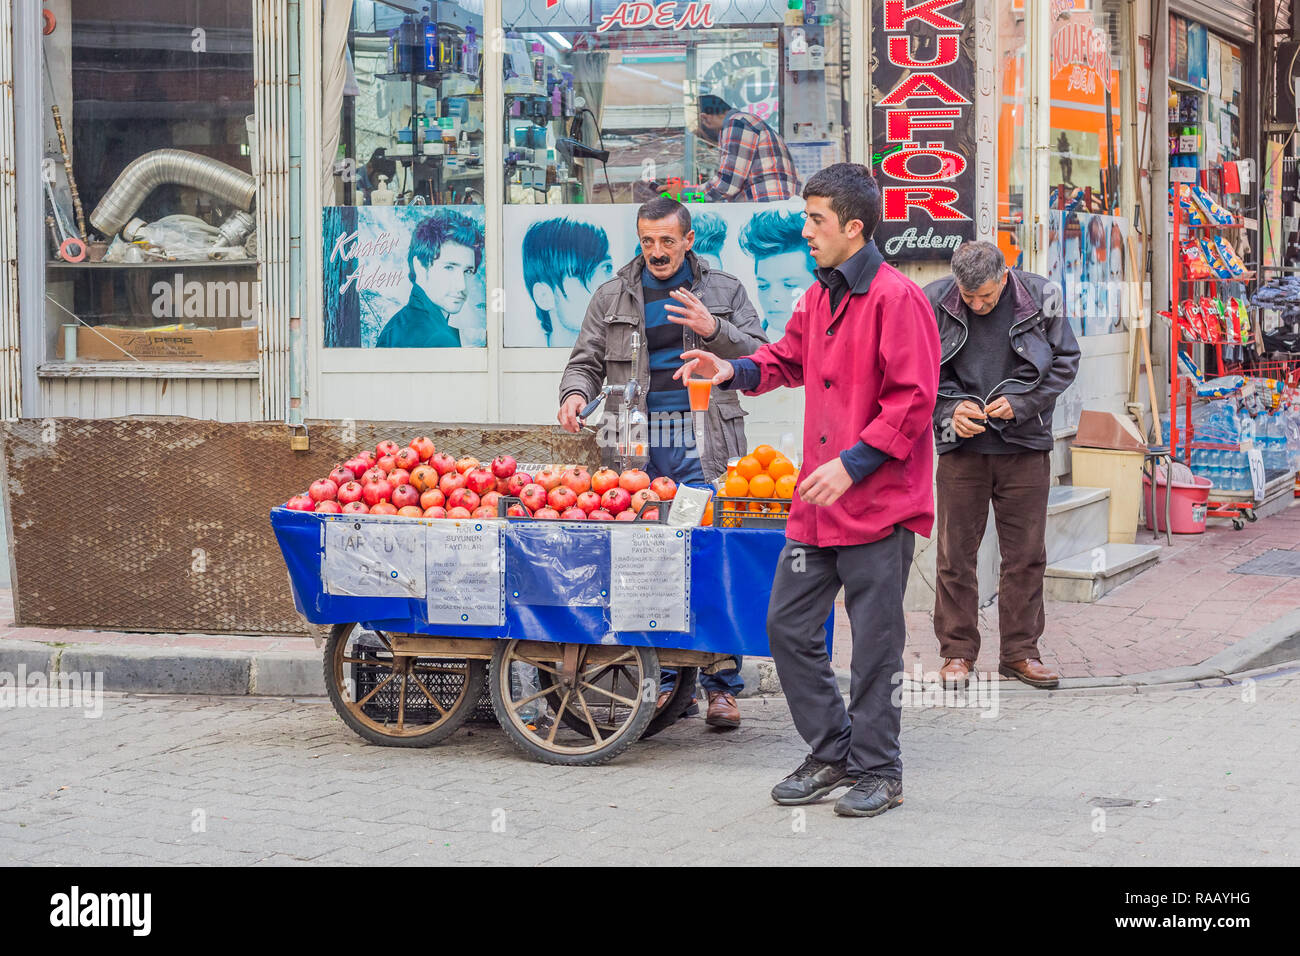 Istanbul, Turkey, January 21. 2015: Turkish man selling pomegranate and orange juices in the street in Aksaray. Stock Photo